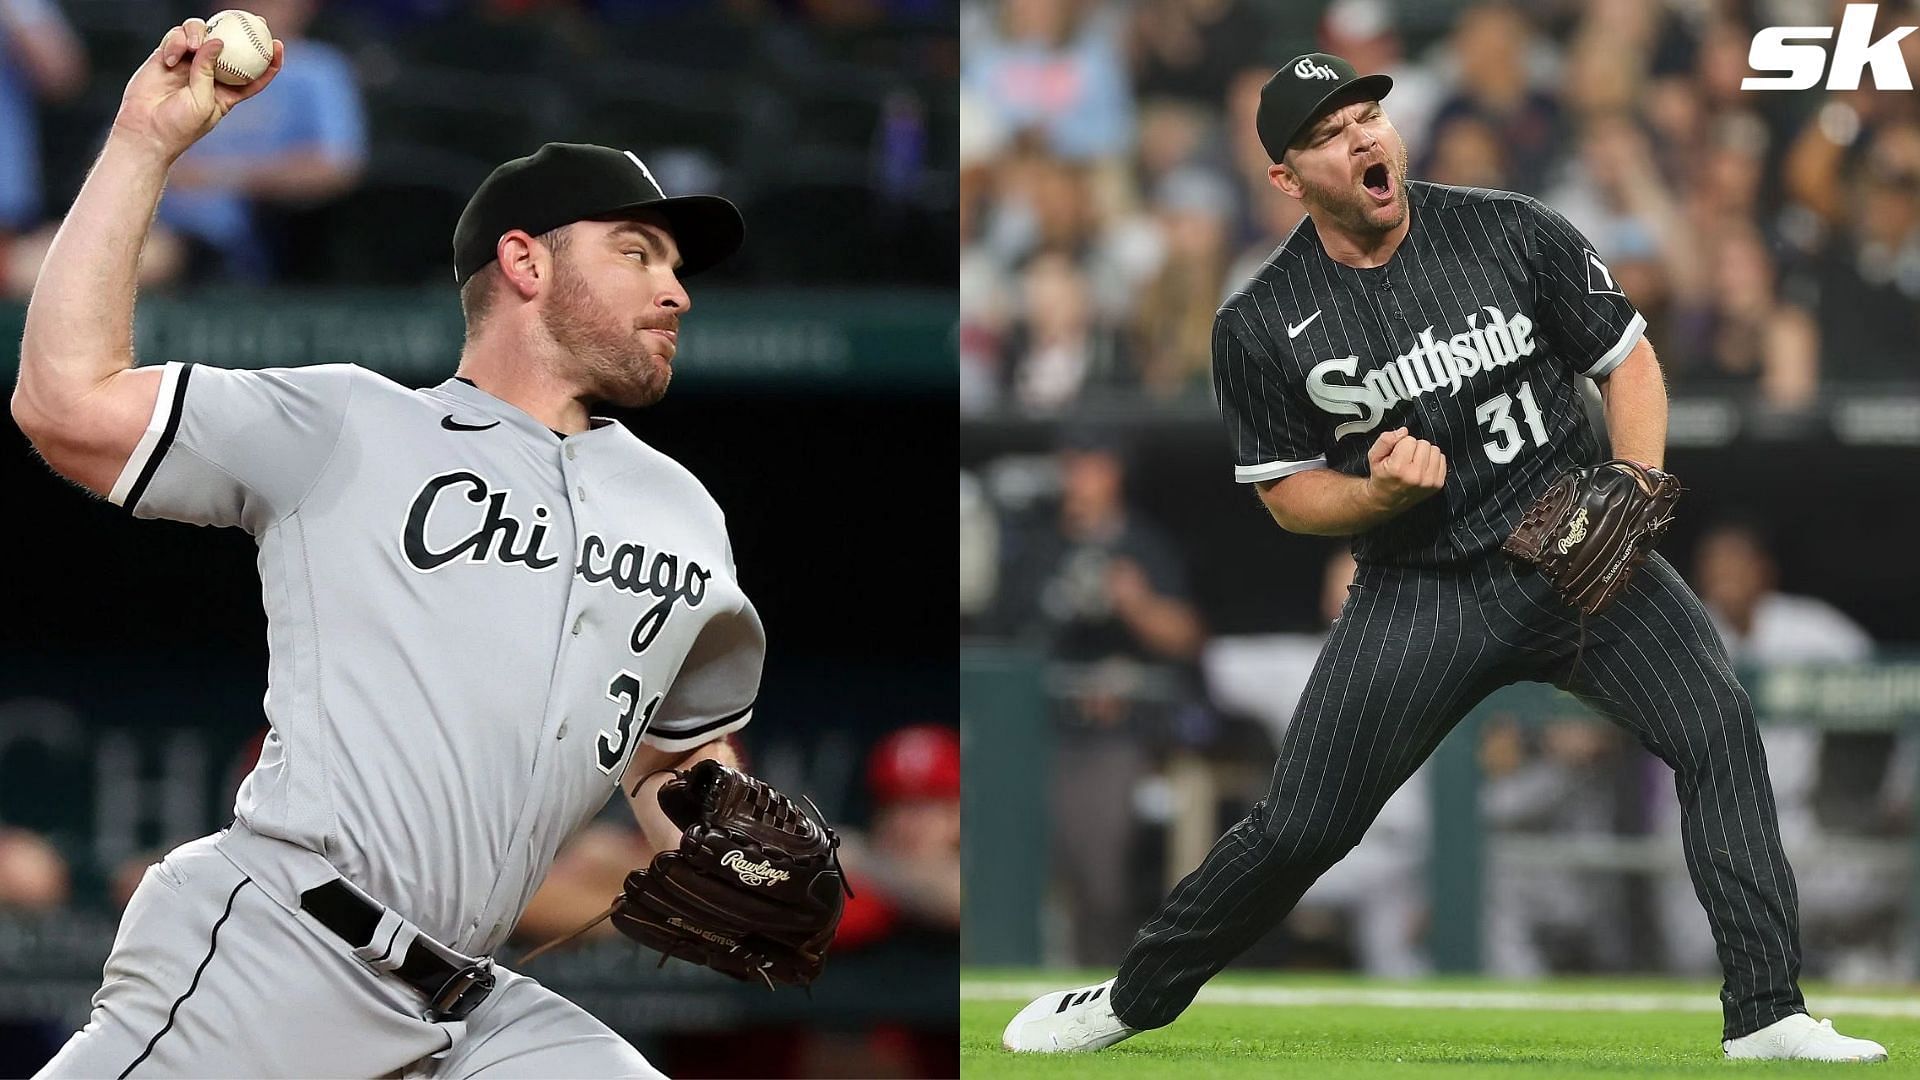 White Sox reliever undergoes surgery months after return from